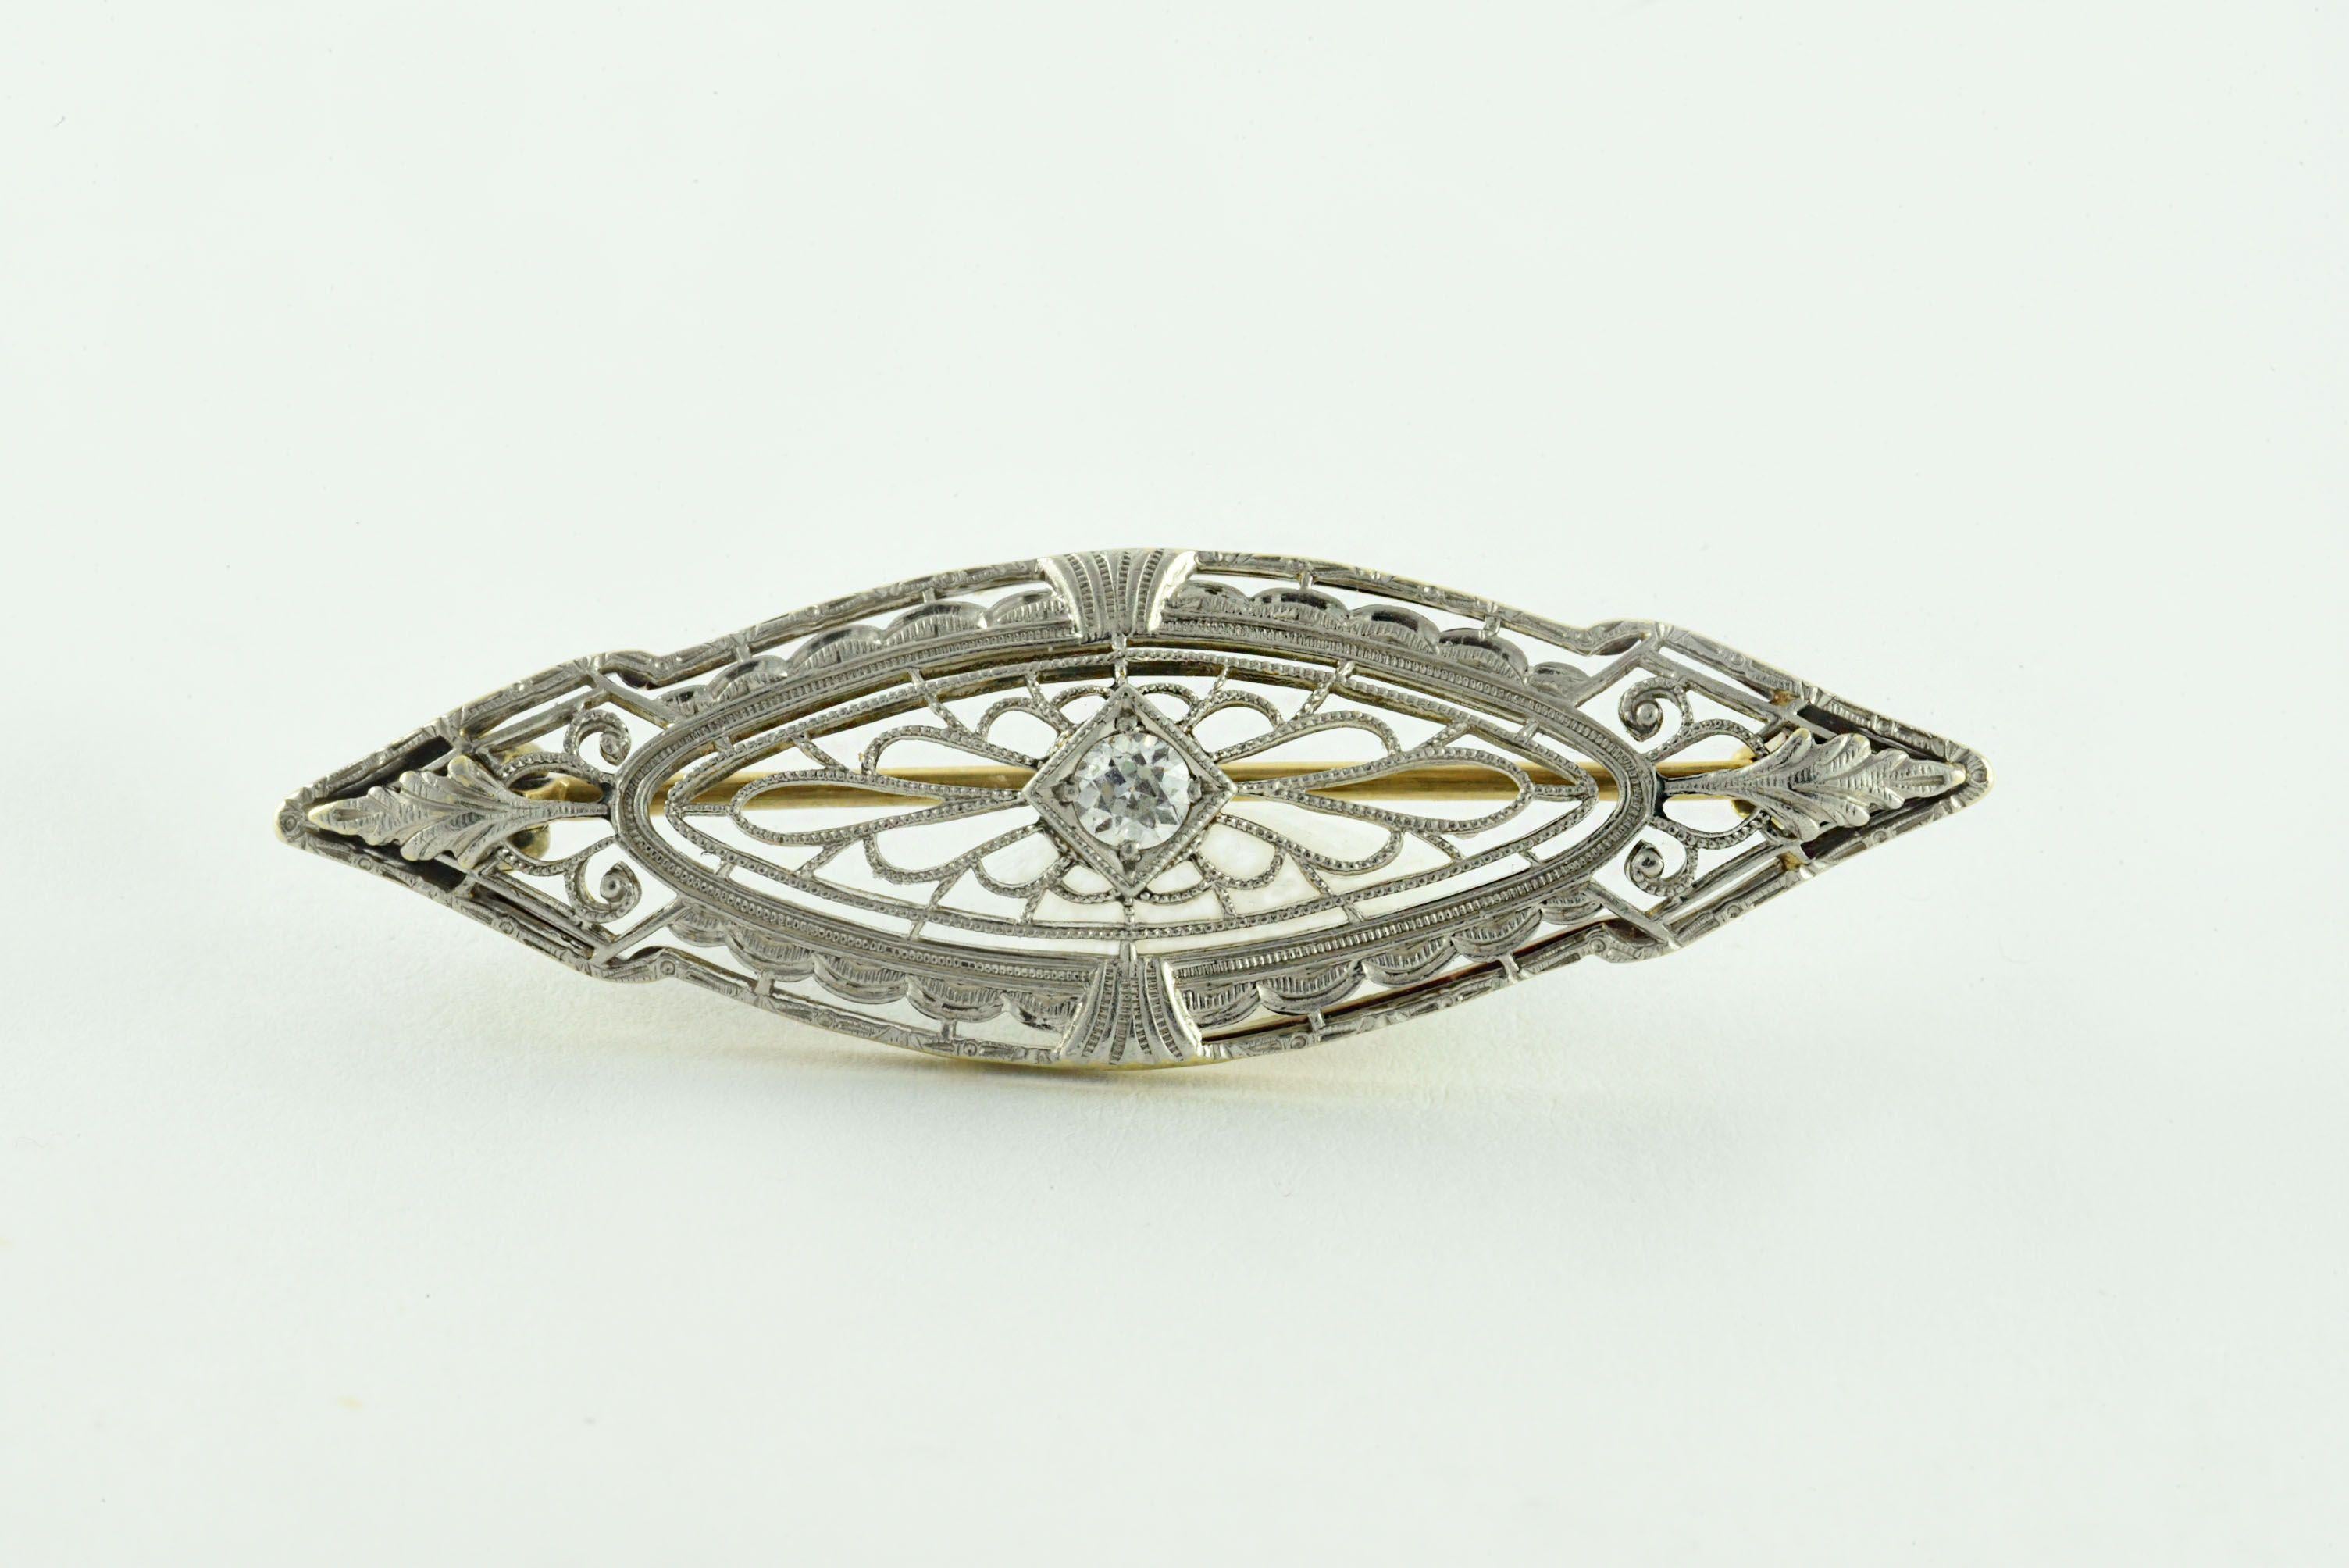 An Old European cut diamond weighing approximately 0.15 carats, G color, VS clarity, centers this stunning two-toned Art Deco brooch with delicate filigree, fashioned in 14kt yellow gold and platinum. 
